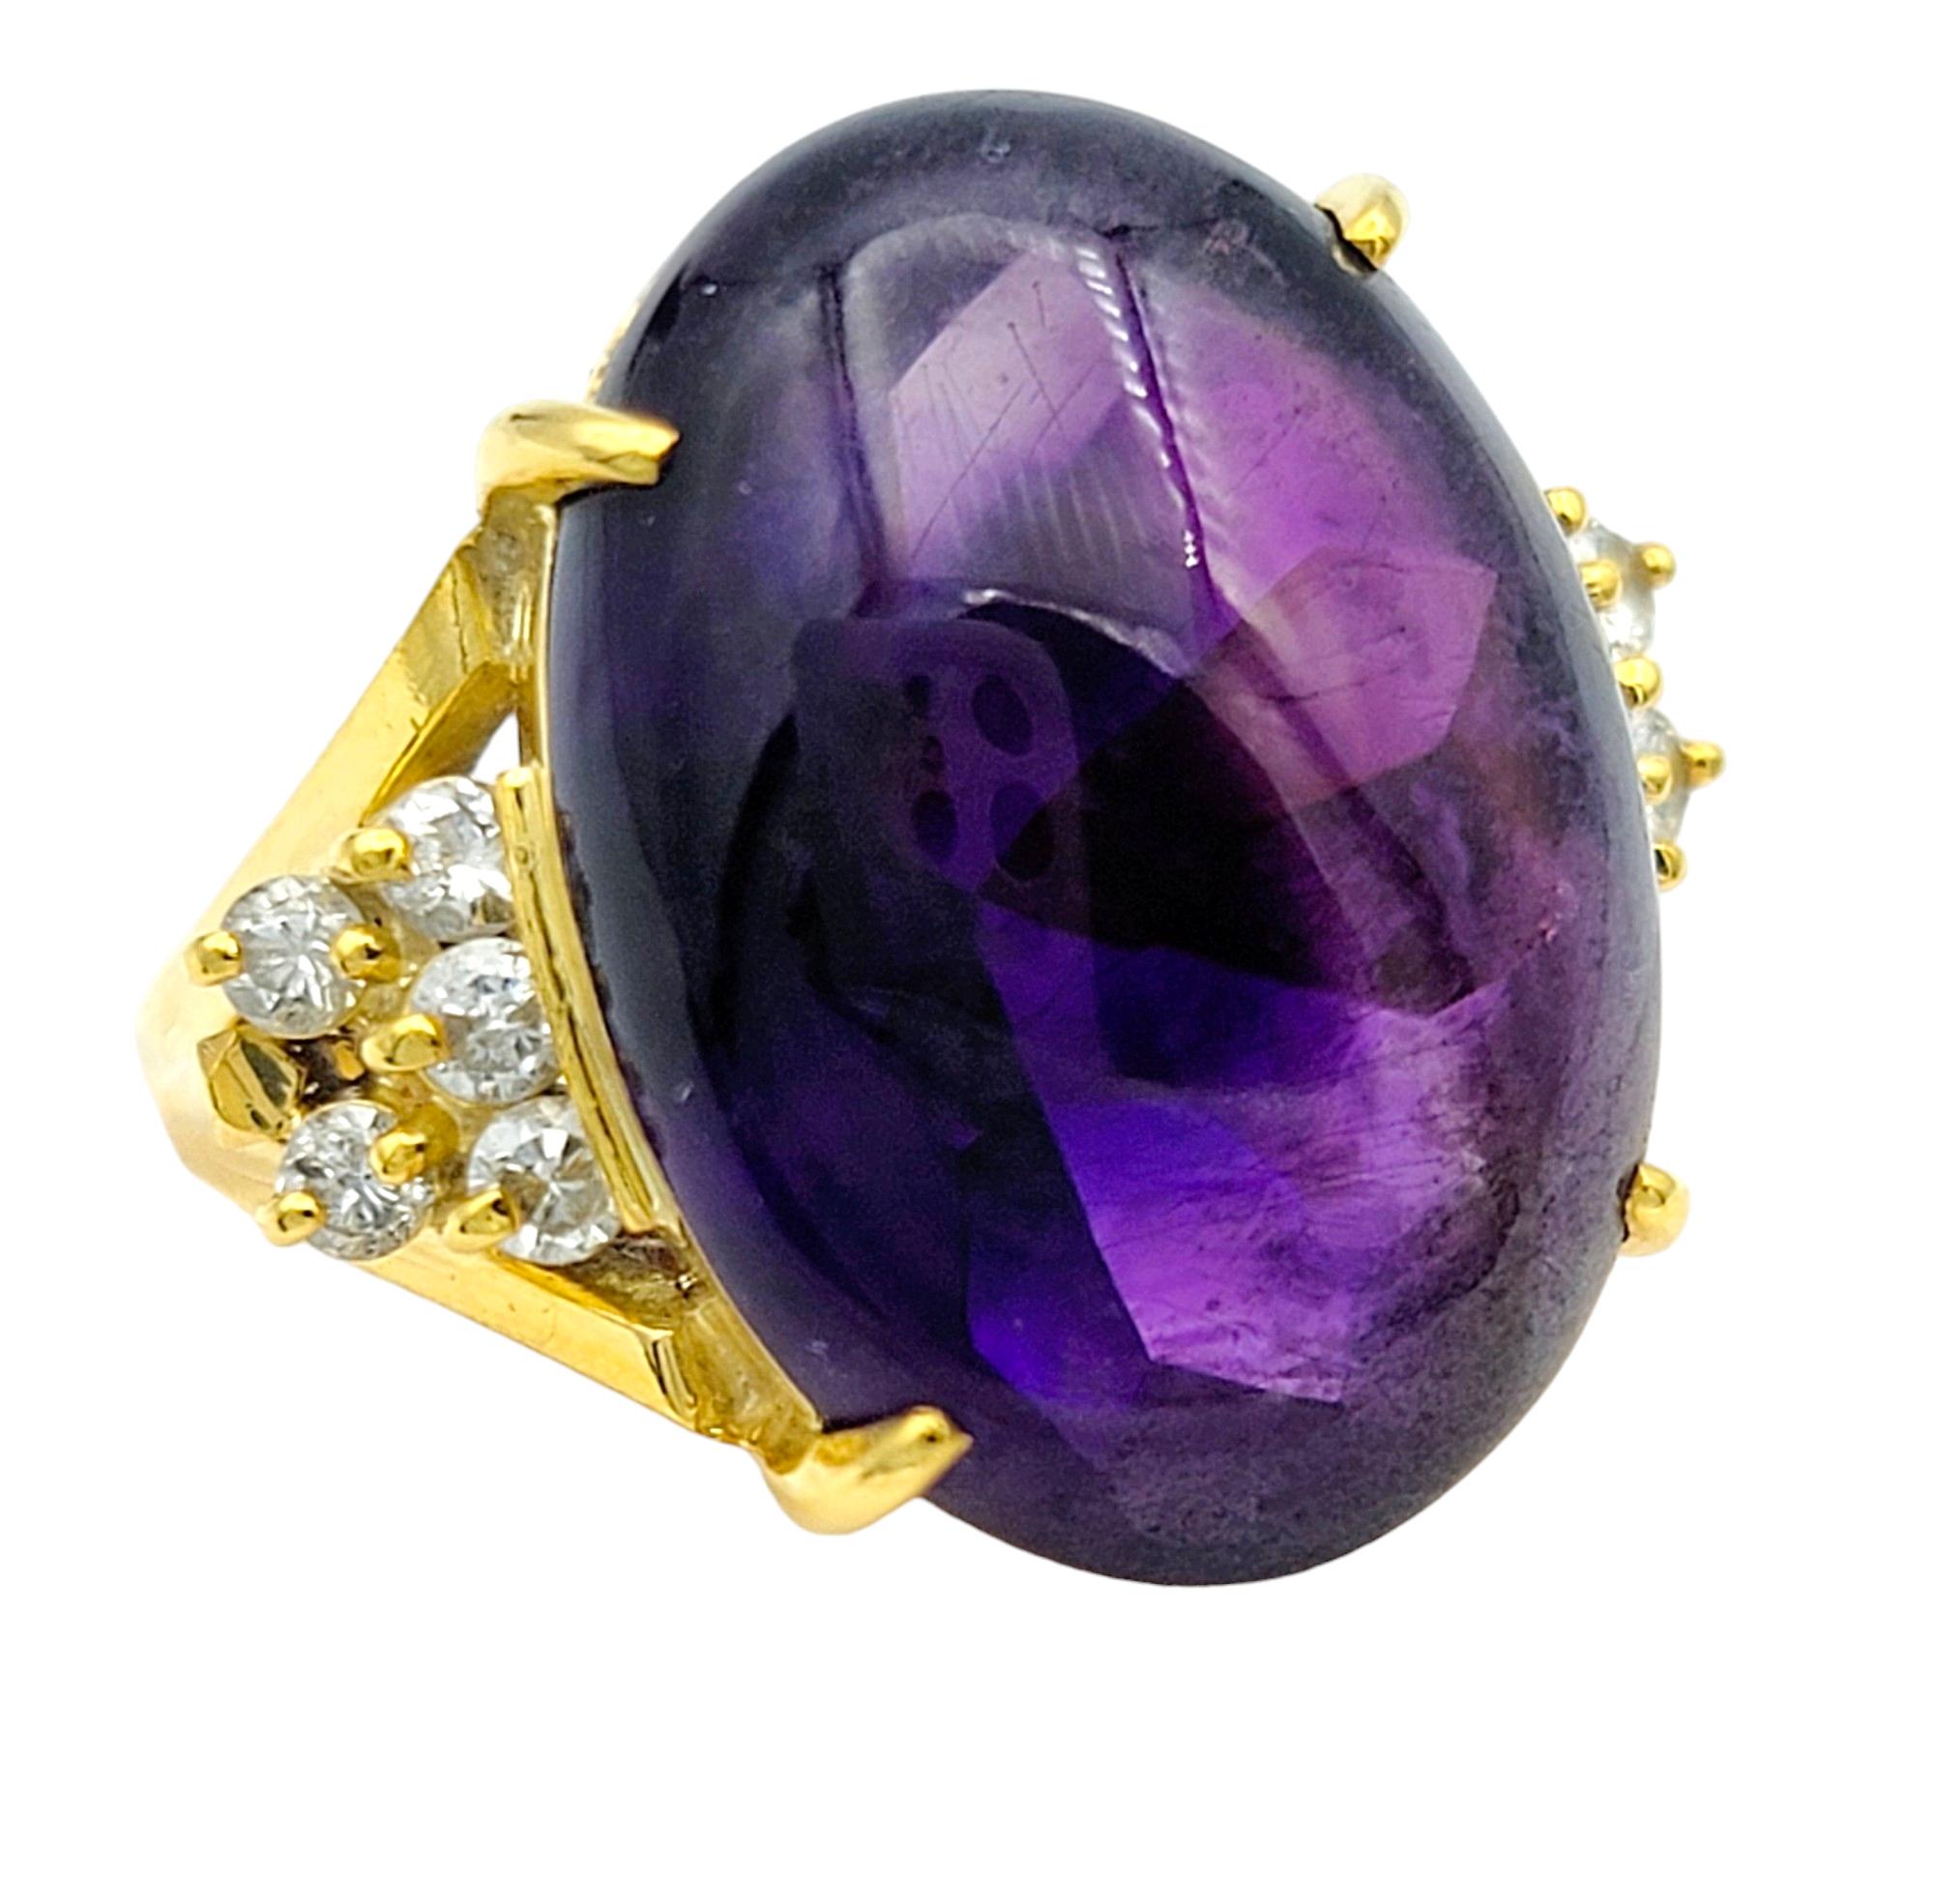 Ring Size: 4.75

This charming ring features a captivating oval cabochon amethyst embraced by shimmering diamonds on each side, all set in radiant 18 karat yellow gold. The rich purple hue of the amethyst gemstone exudes a sense of sophistication